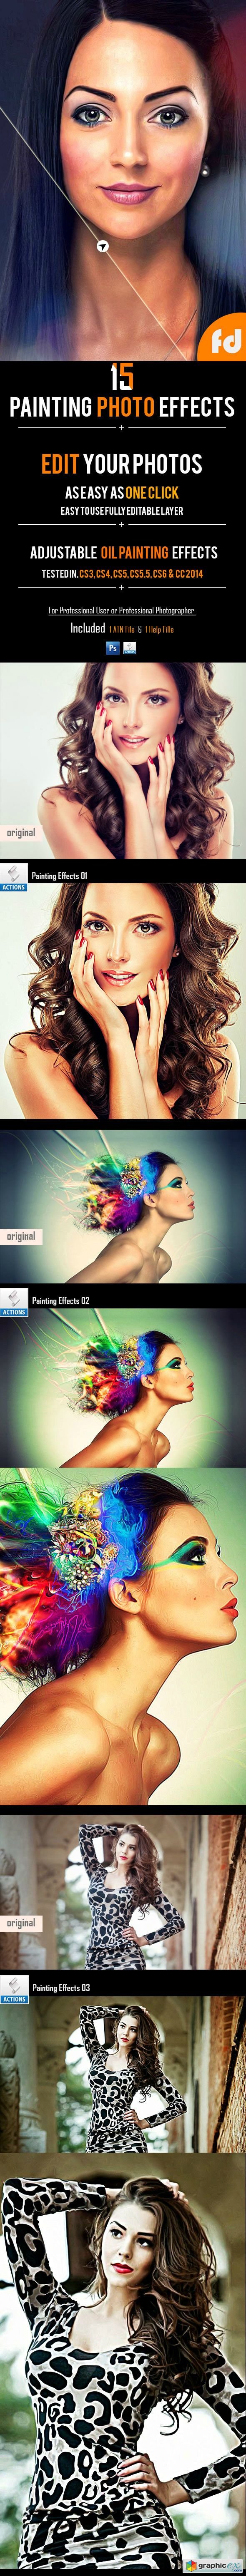 15 Painting Photo Effects